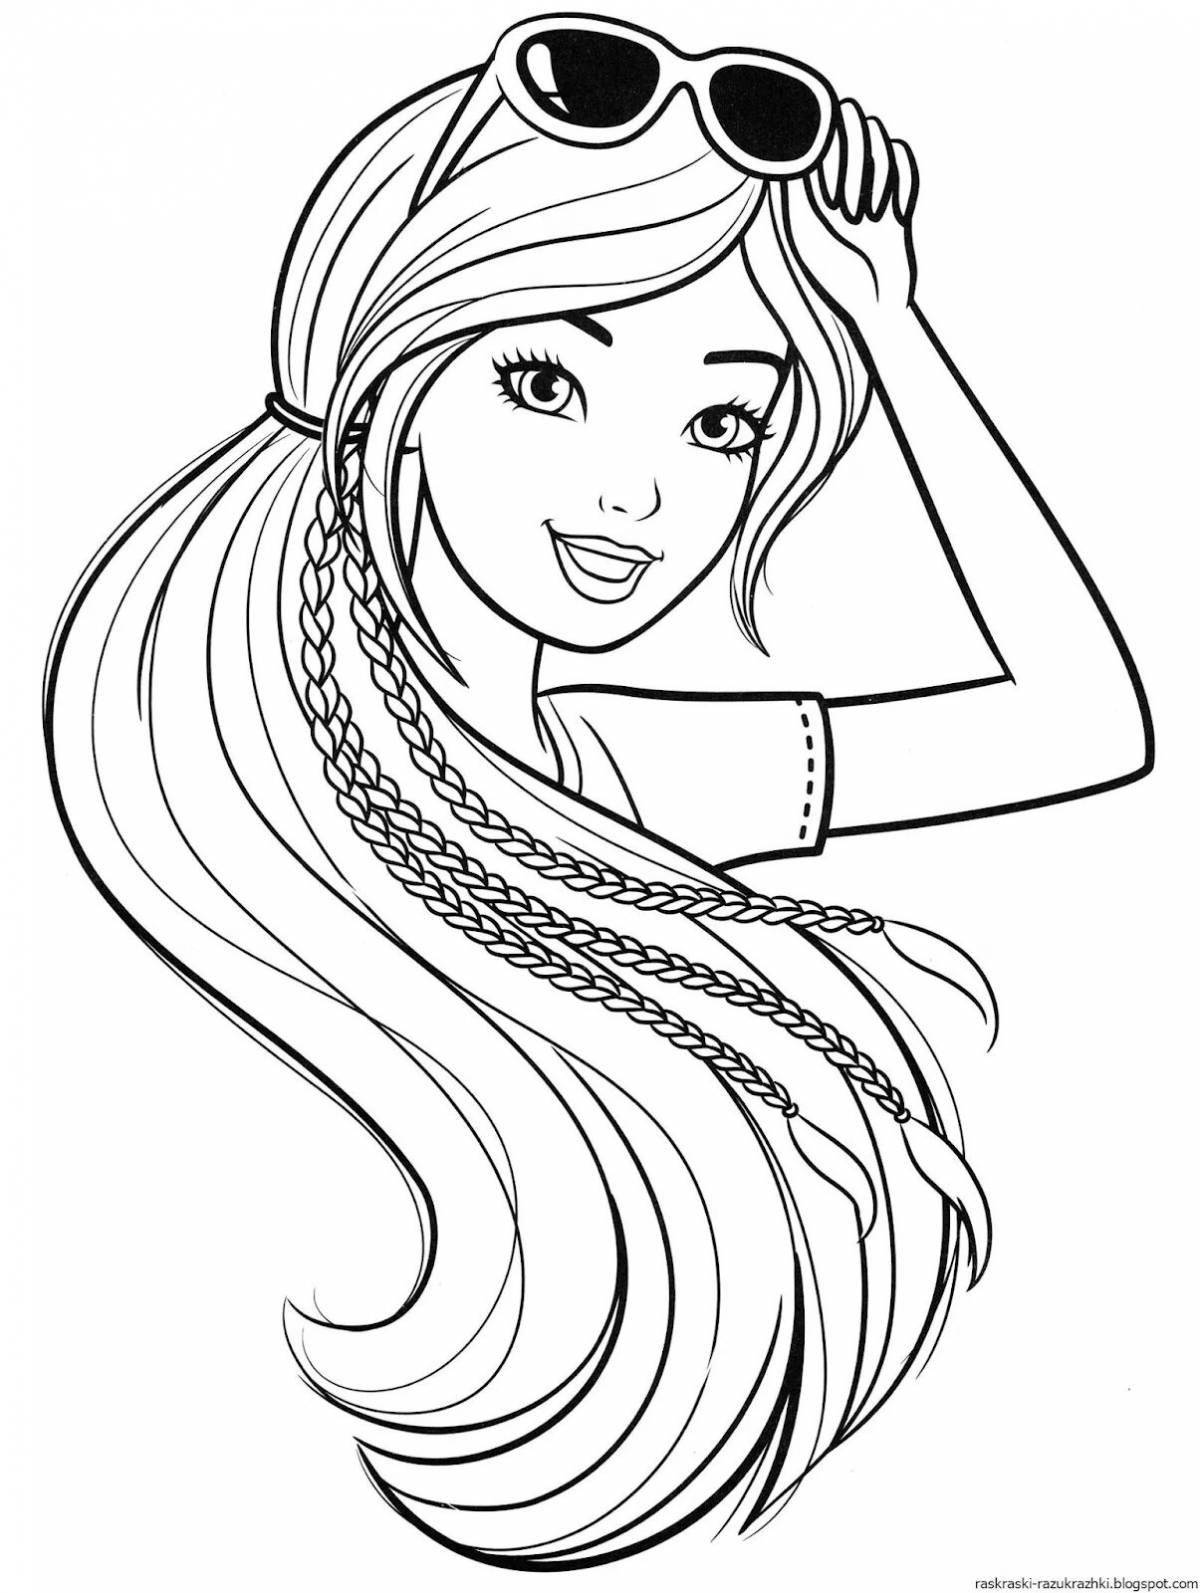 Glamorous coloring book popular for 12 year old girls